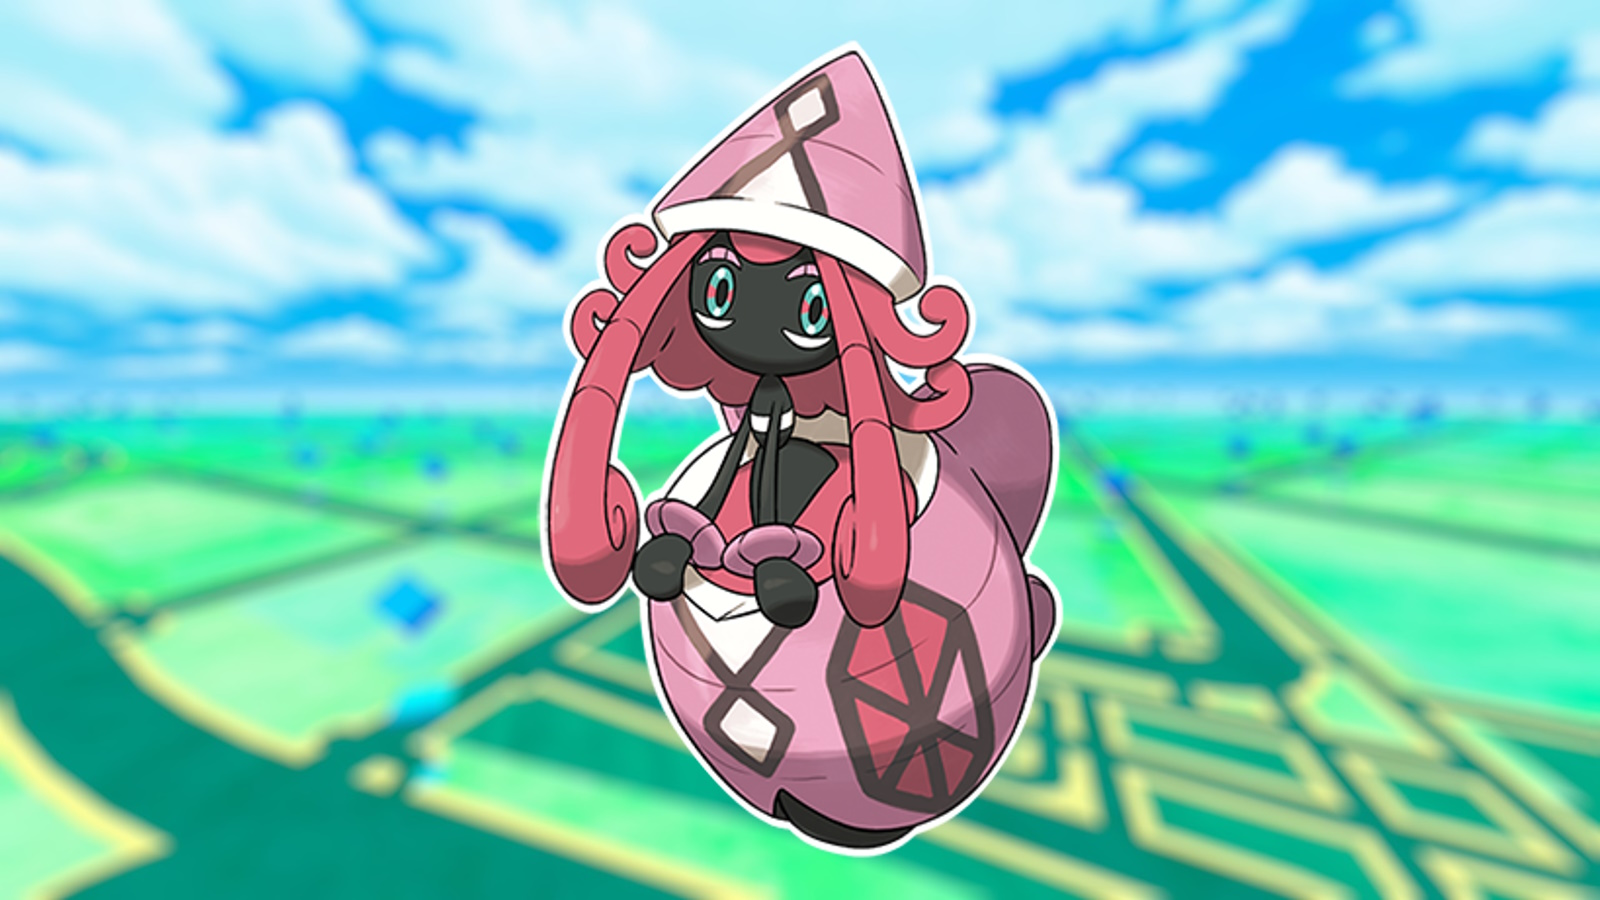 Pokemon Go Tapu Fini Raid Guide: Best Counters, Weaknesses and